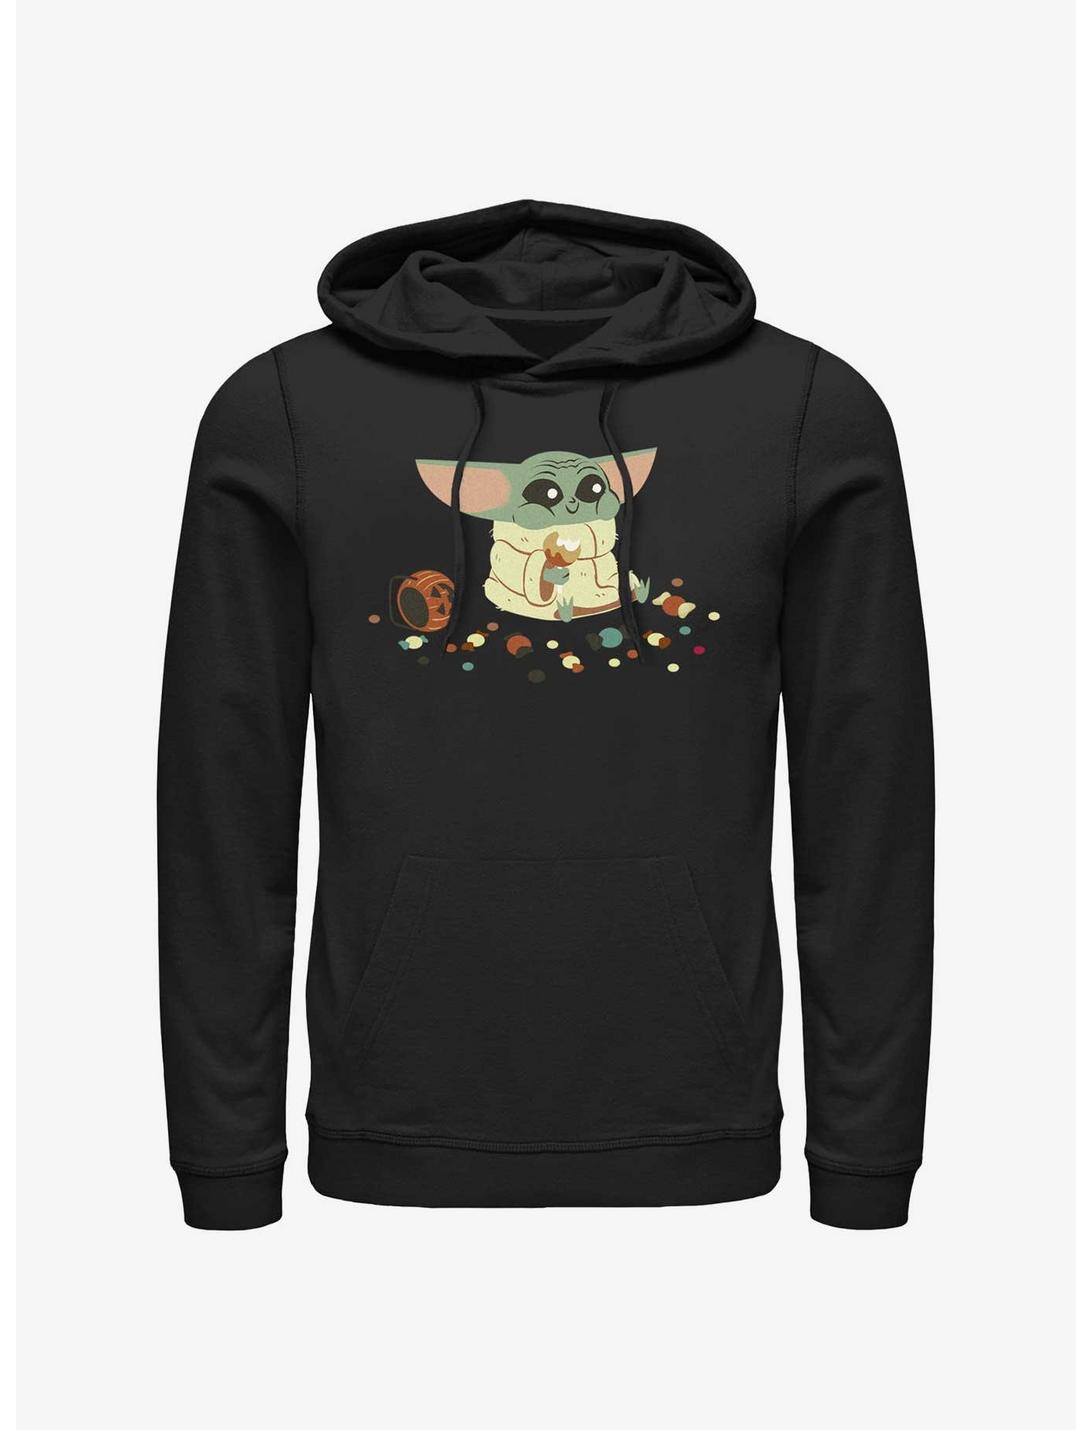 Star Wars The Mandalorian The Child Eating Candy Hoodie, BLACK, hi-res